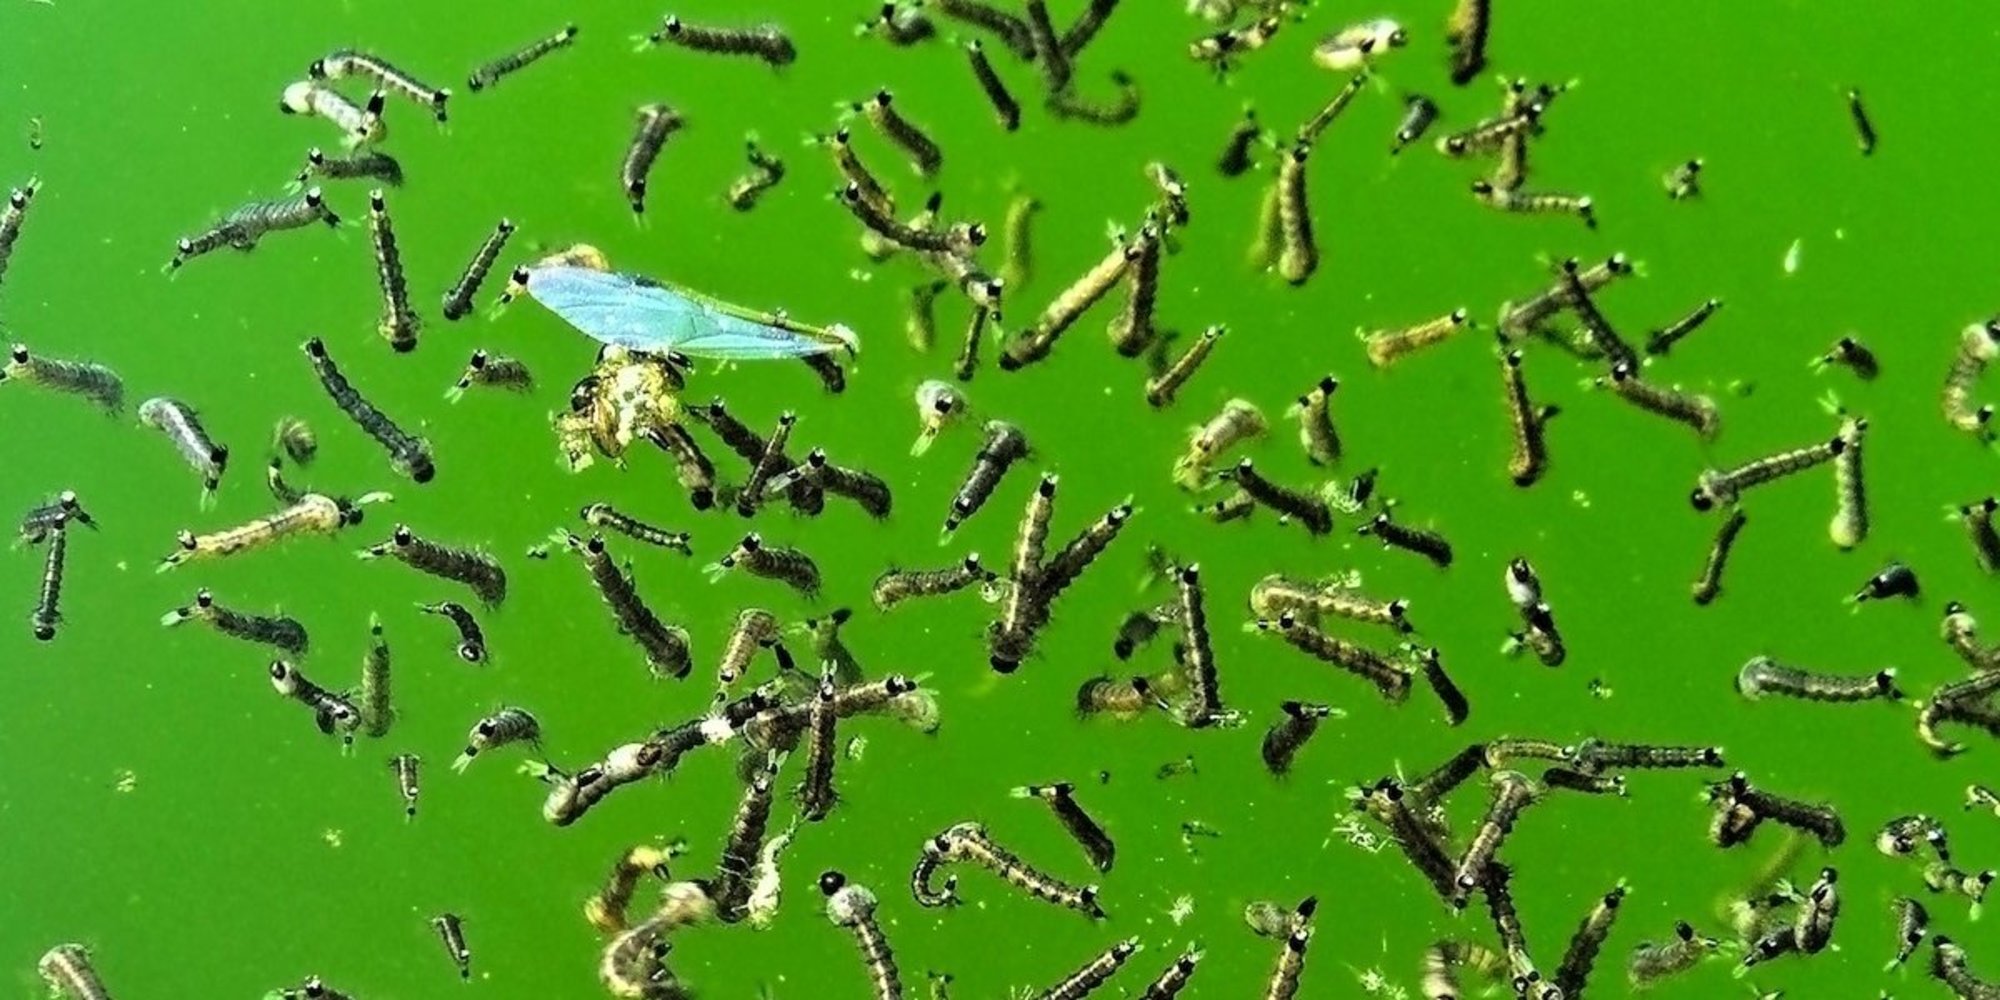 Microplastics may enter food chain via mosquitoes